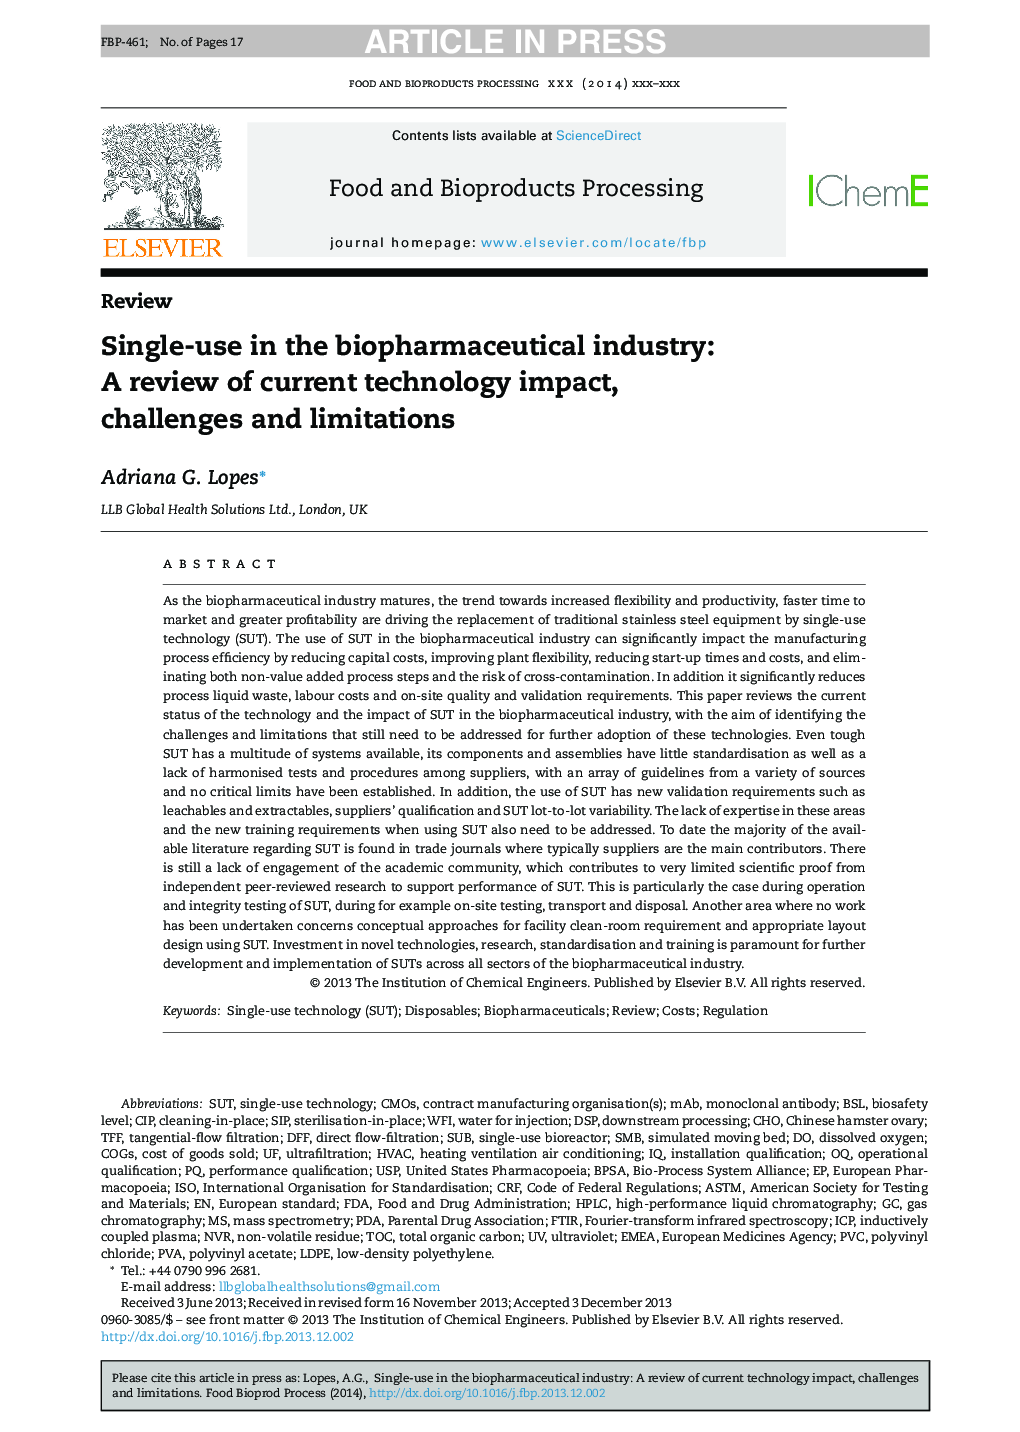 Single-use in the biopharmaceutical industry: A review of current technology impact, challenges and limitations